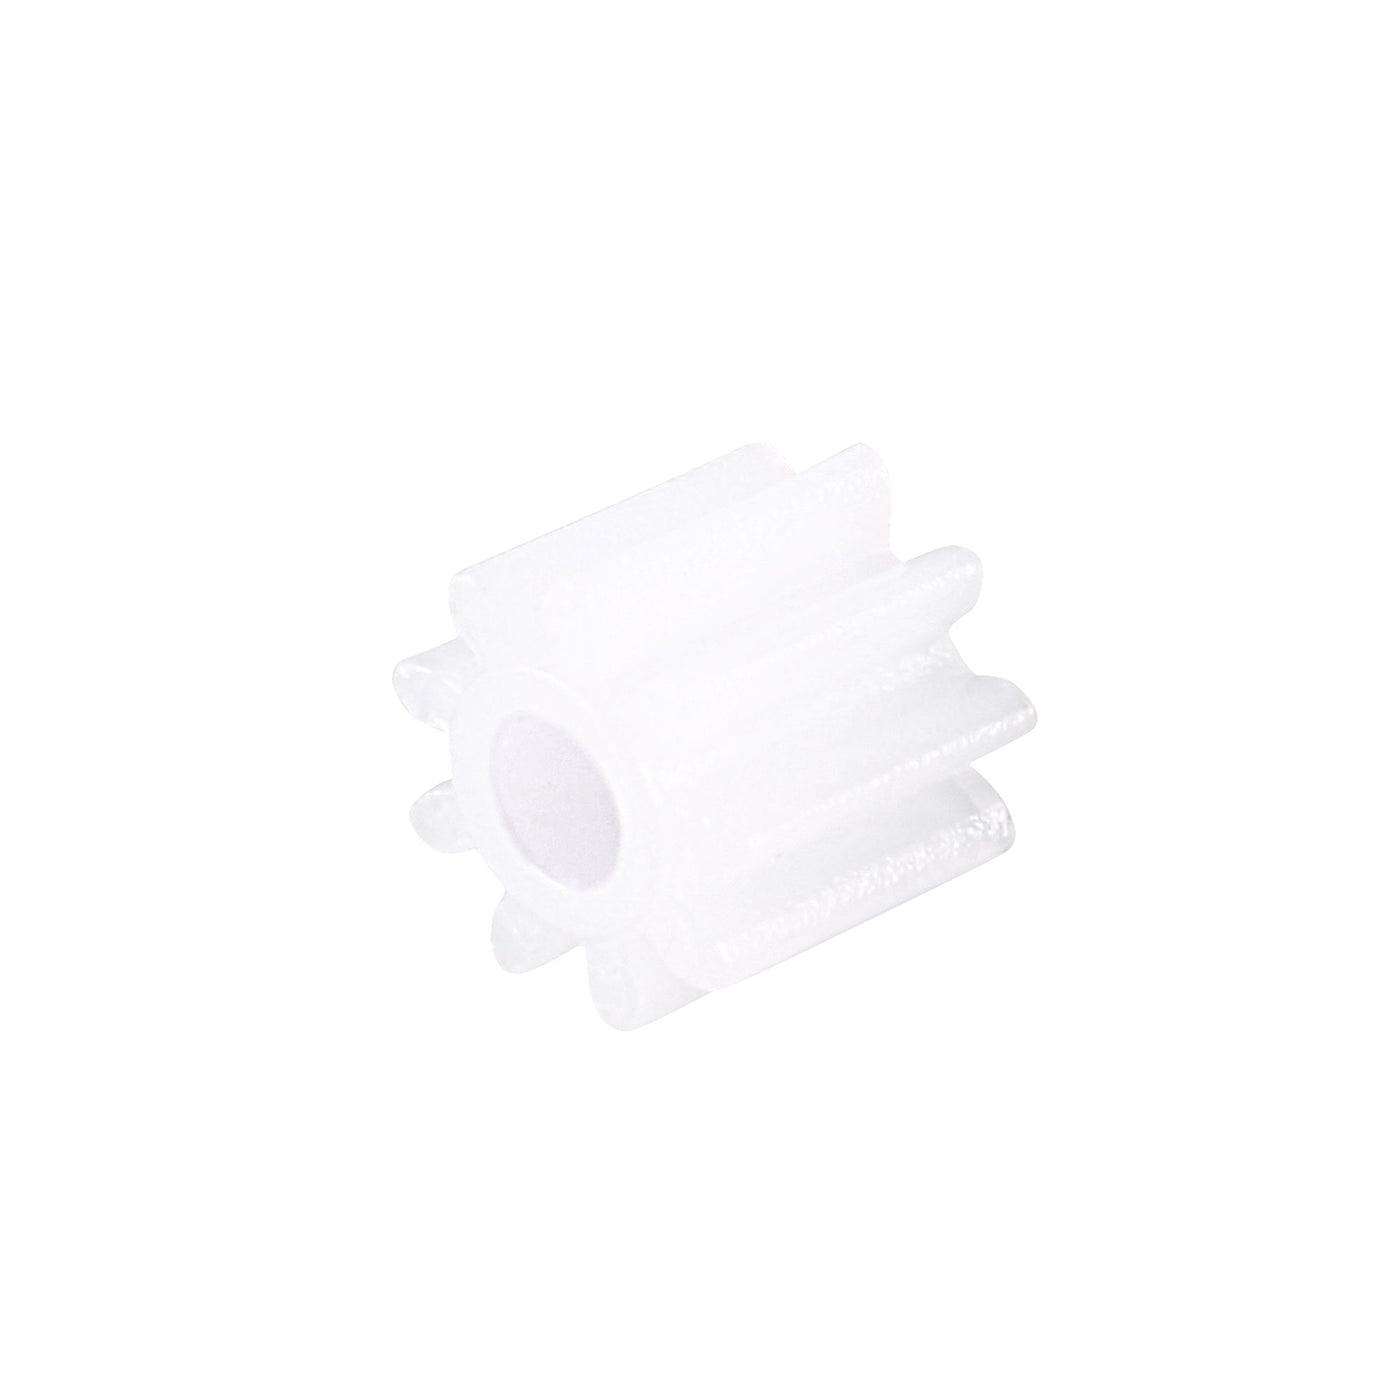 uxcell Uxcell 20Pcs 092A Plastic Gear Accessories with 9 Teeth for DIY Car Robot Motor